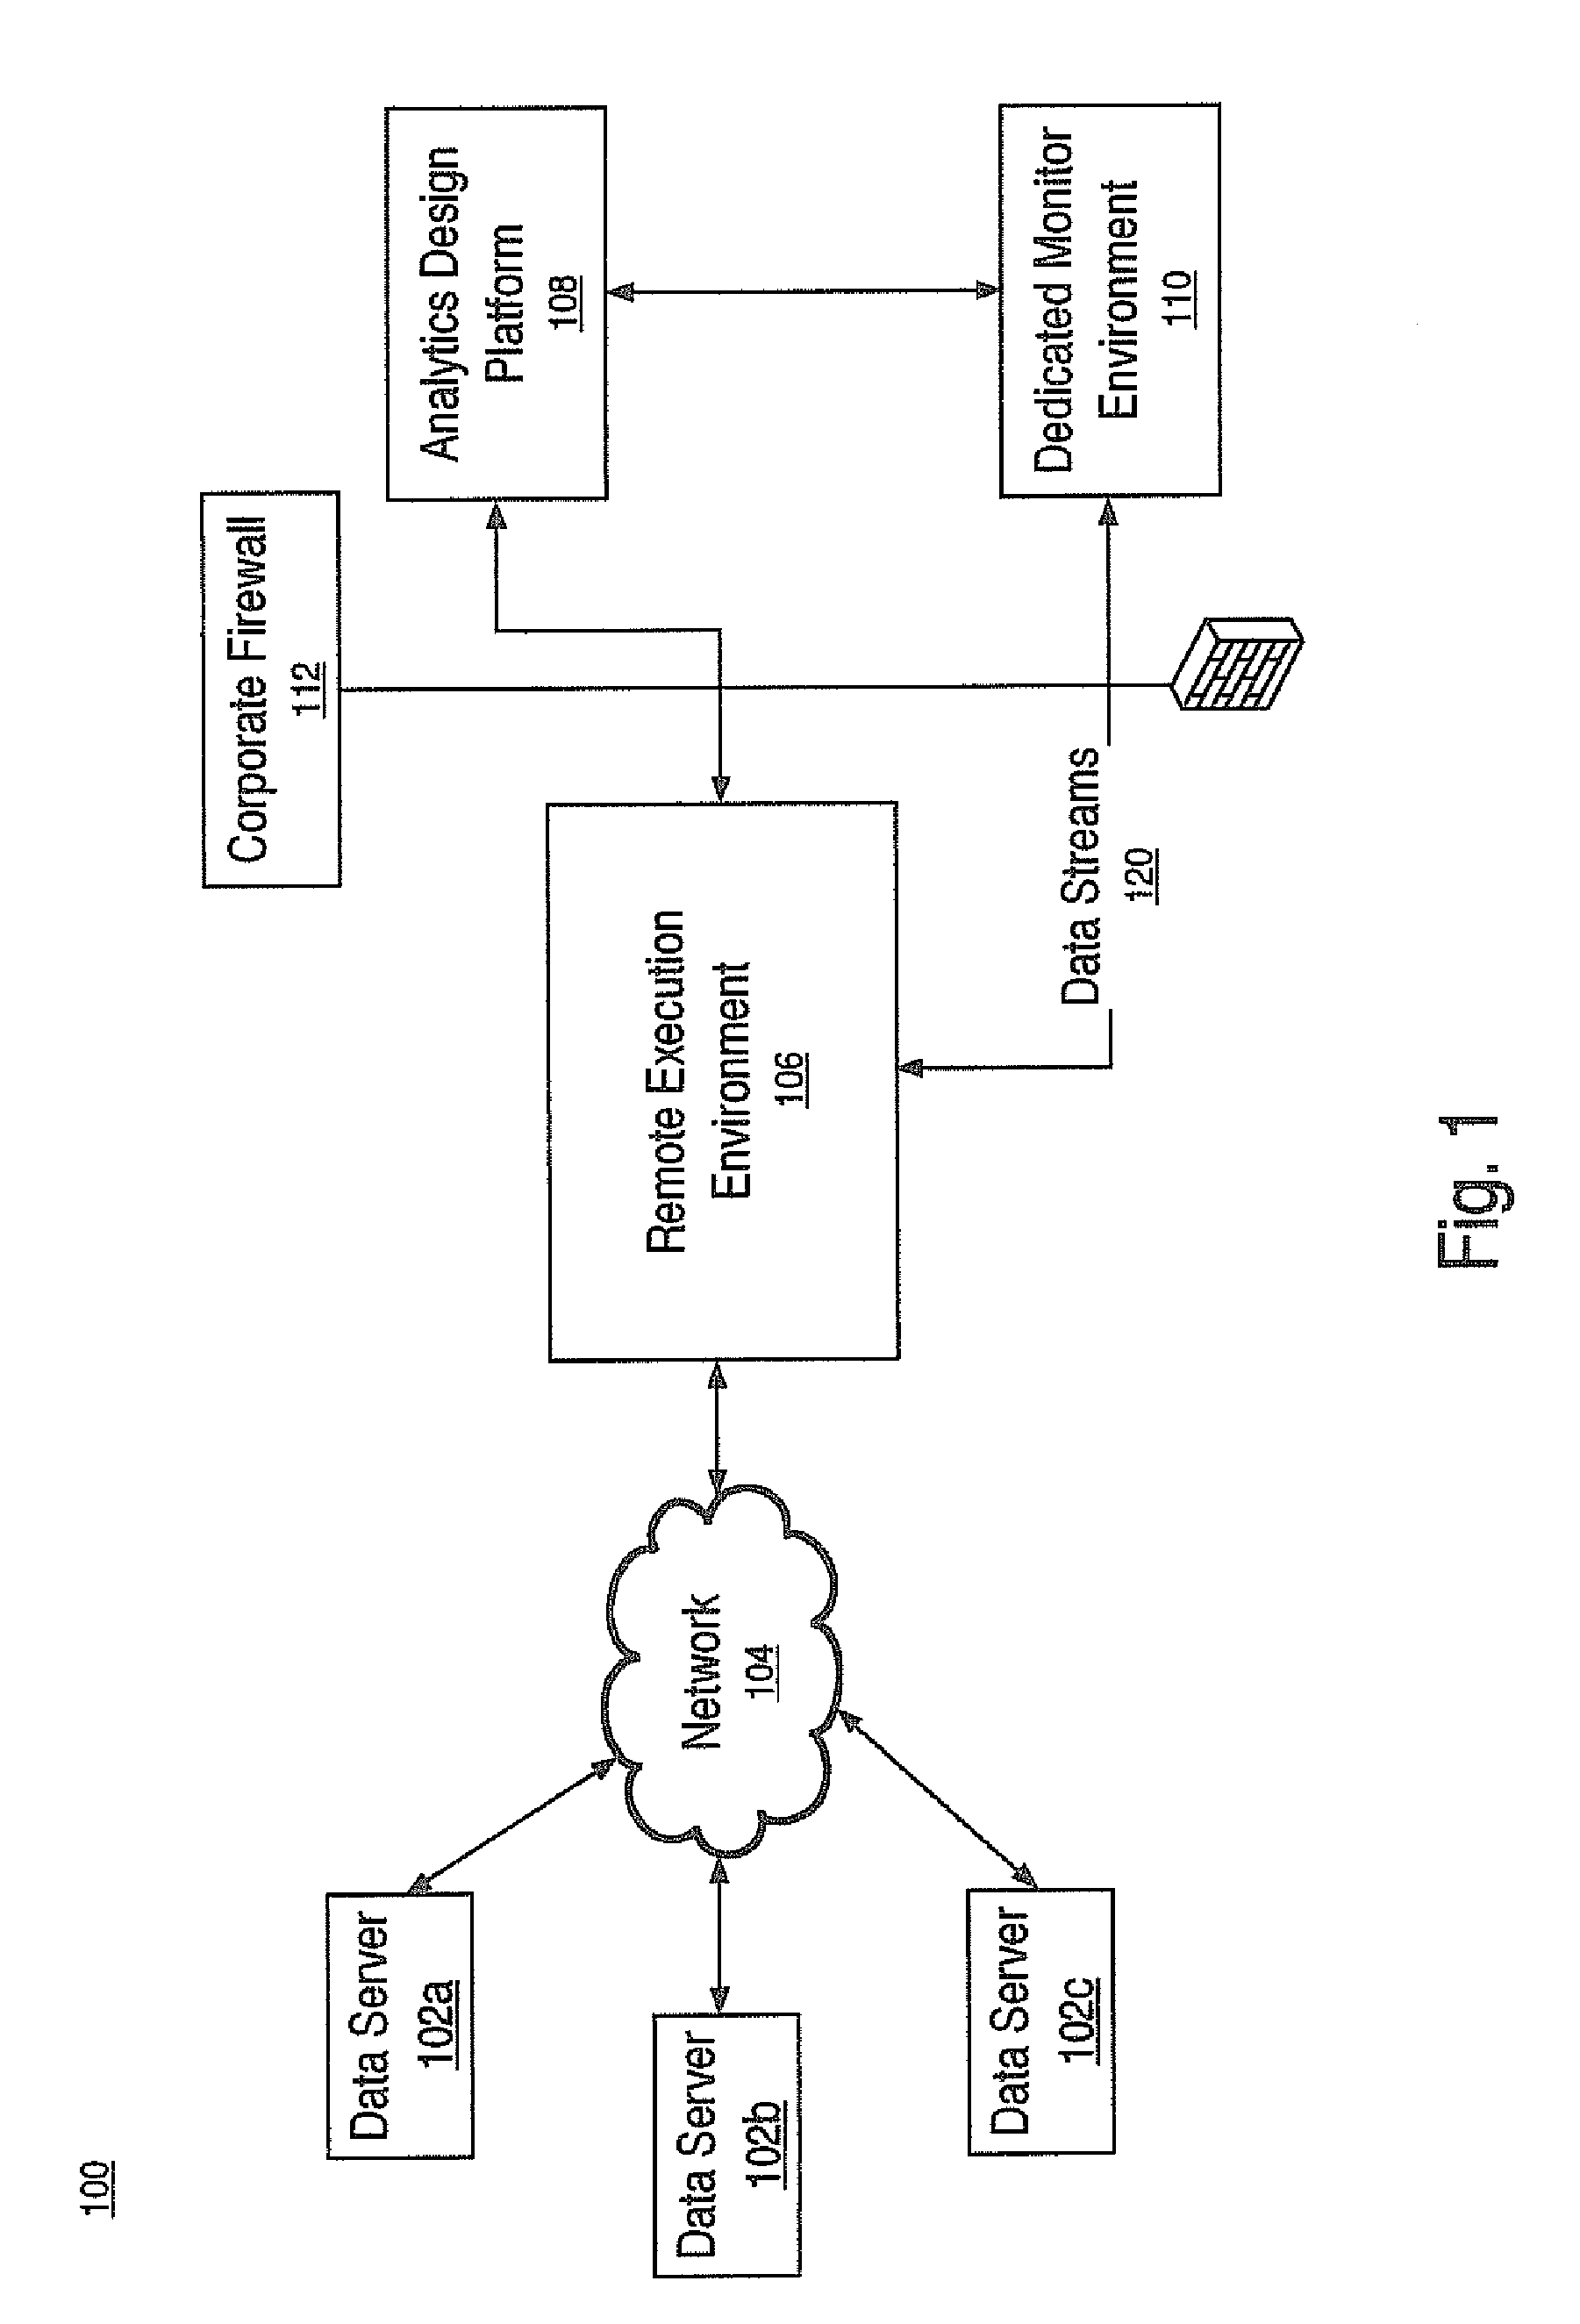 System and method for analytic process design